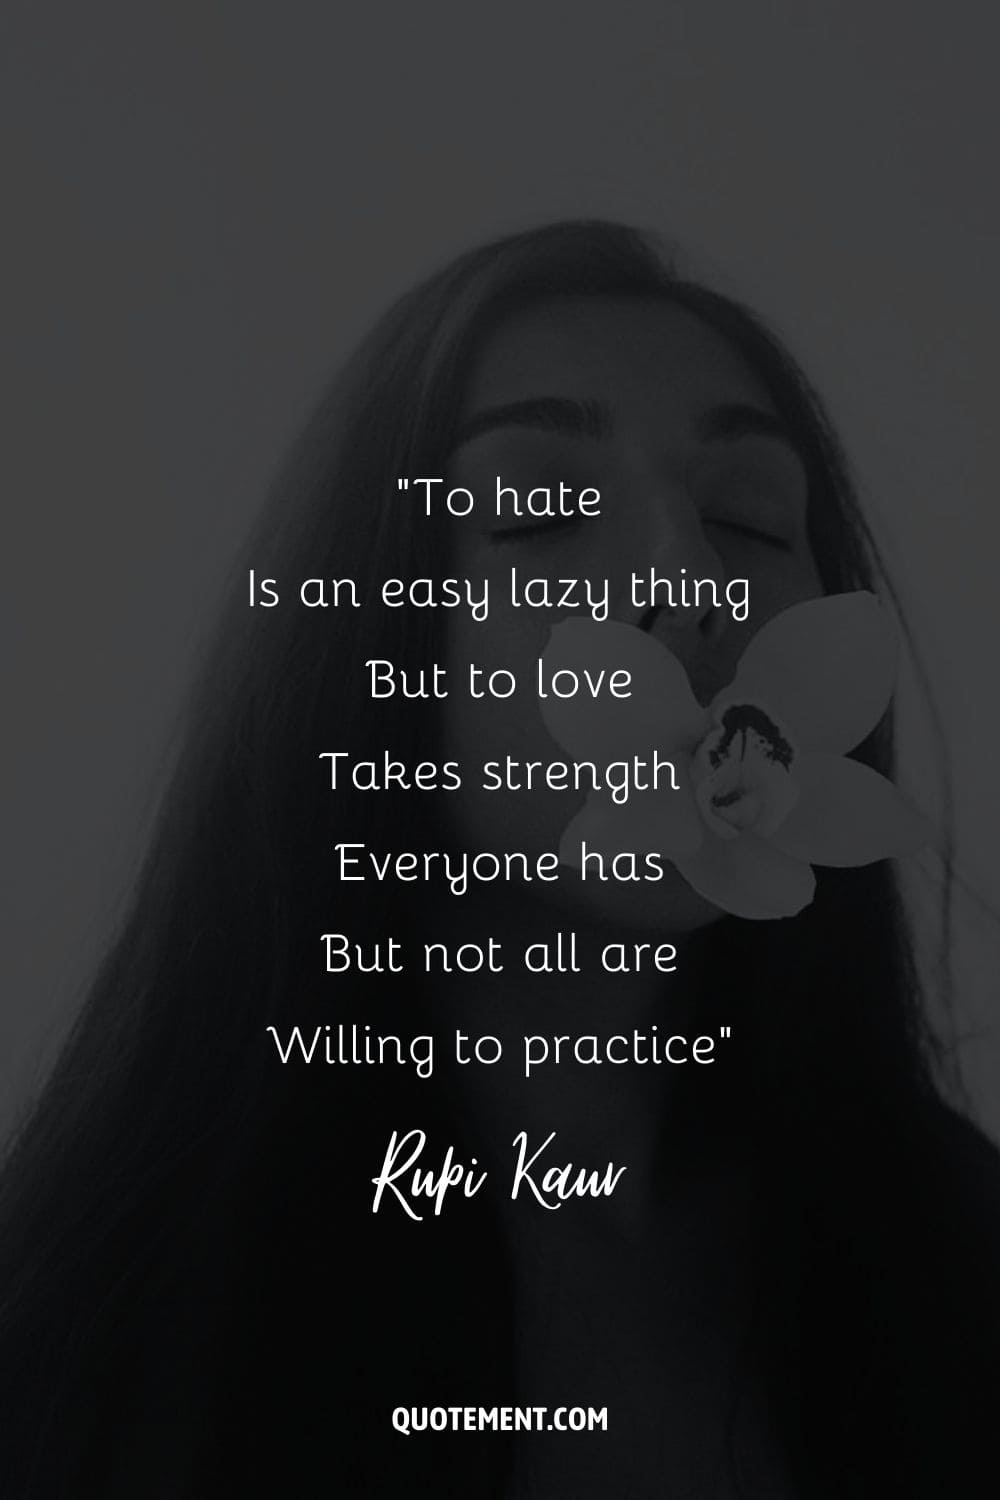 To hate